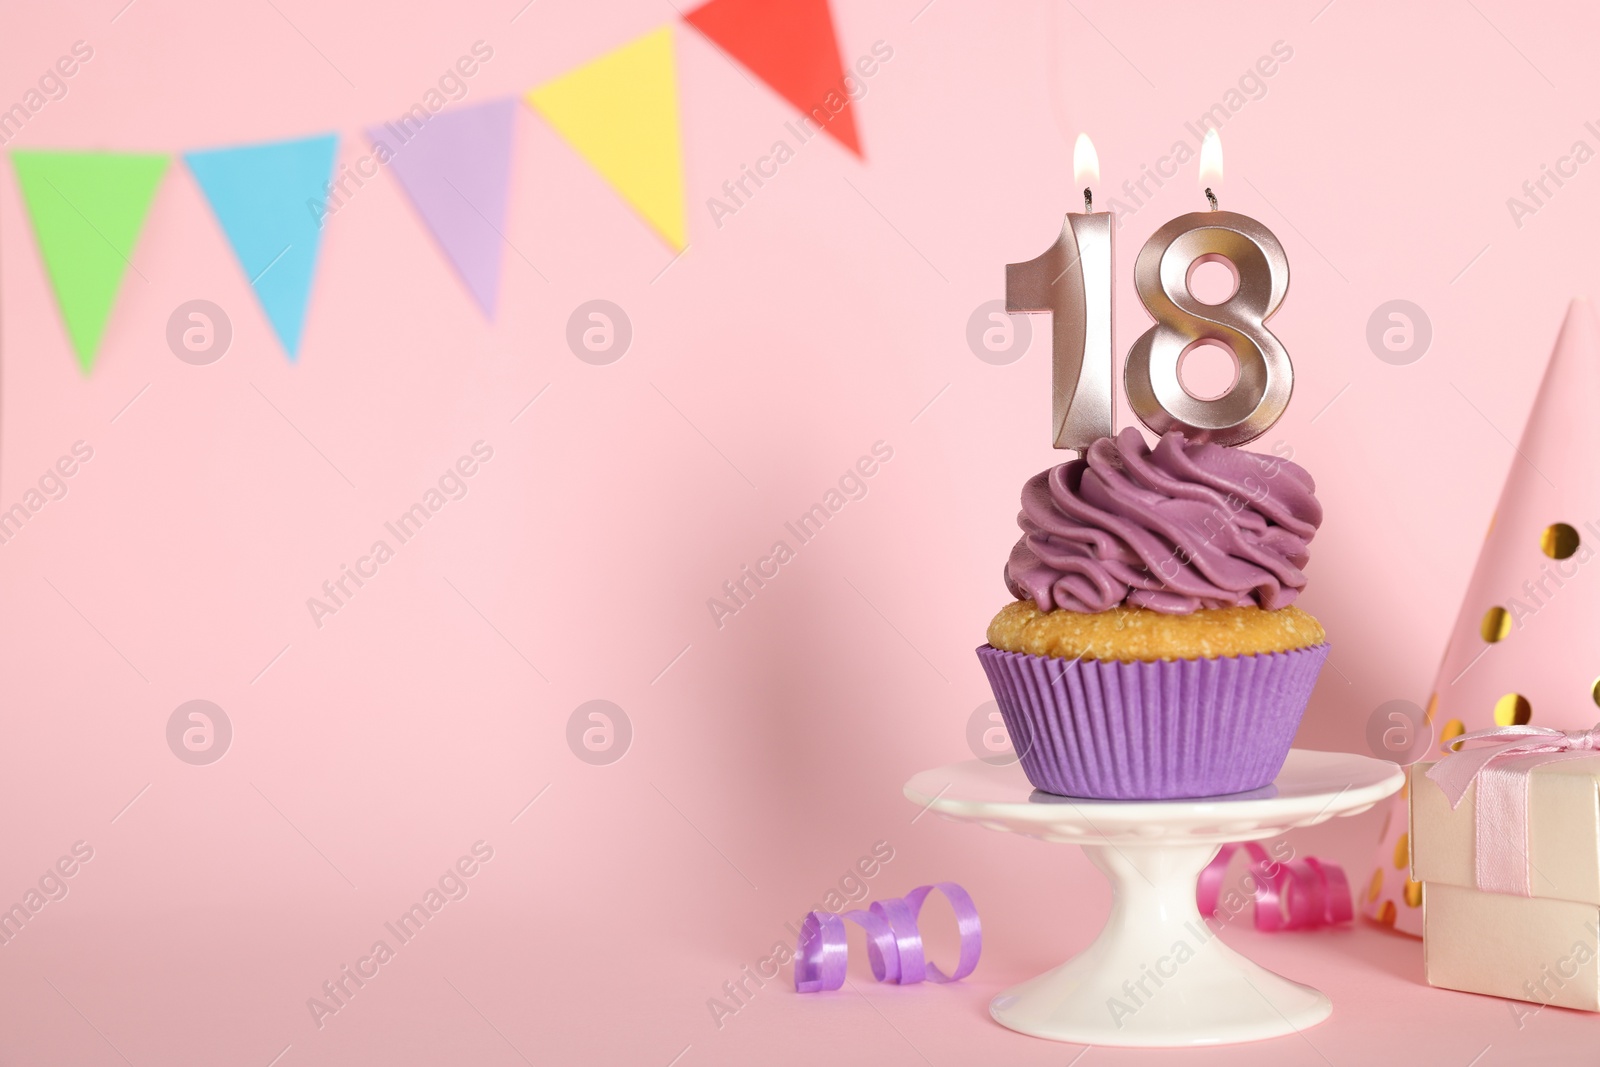 Photo of Delicious cupcake with number shaped candles on pink background, space for text. Coming of age party - 18th birthday